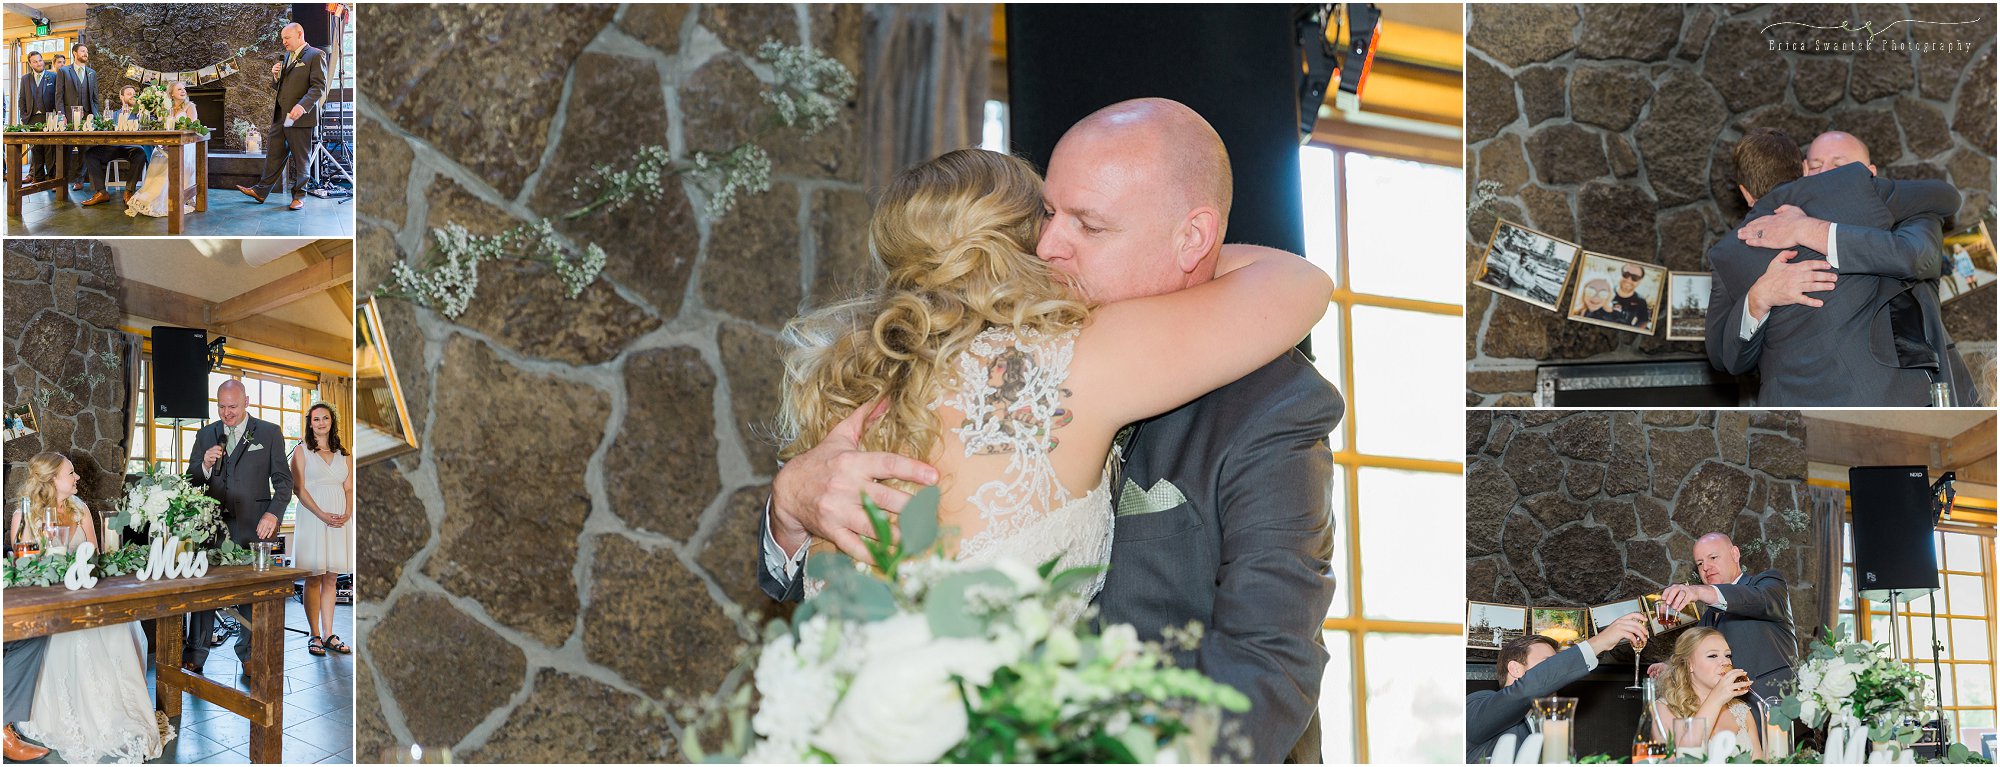 A wonderful wedding reception at Aspen Hall in Bend, OR. | Erica Swantek Photography